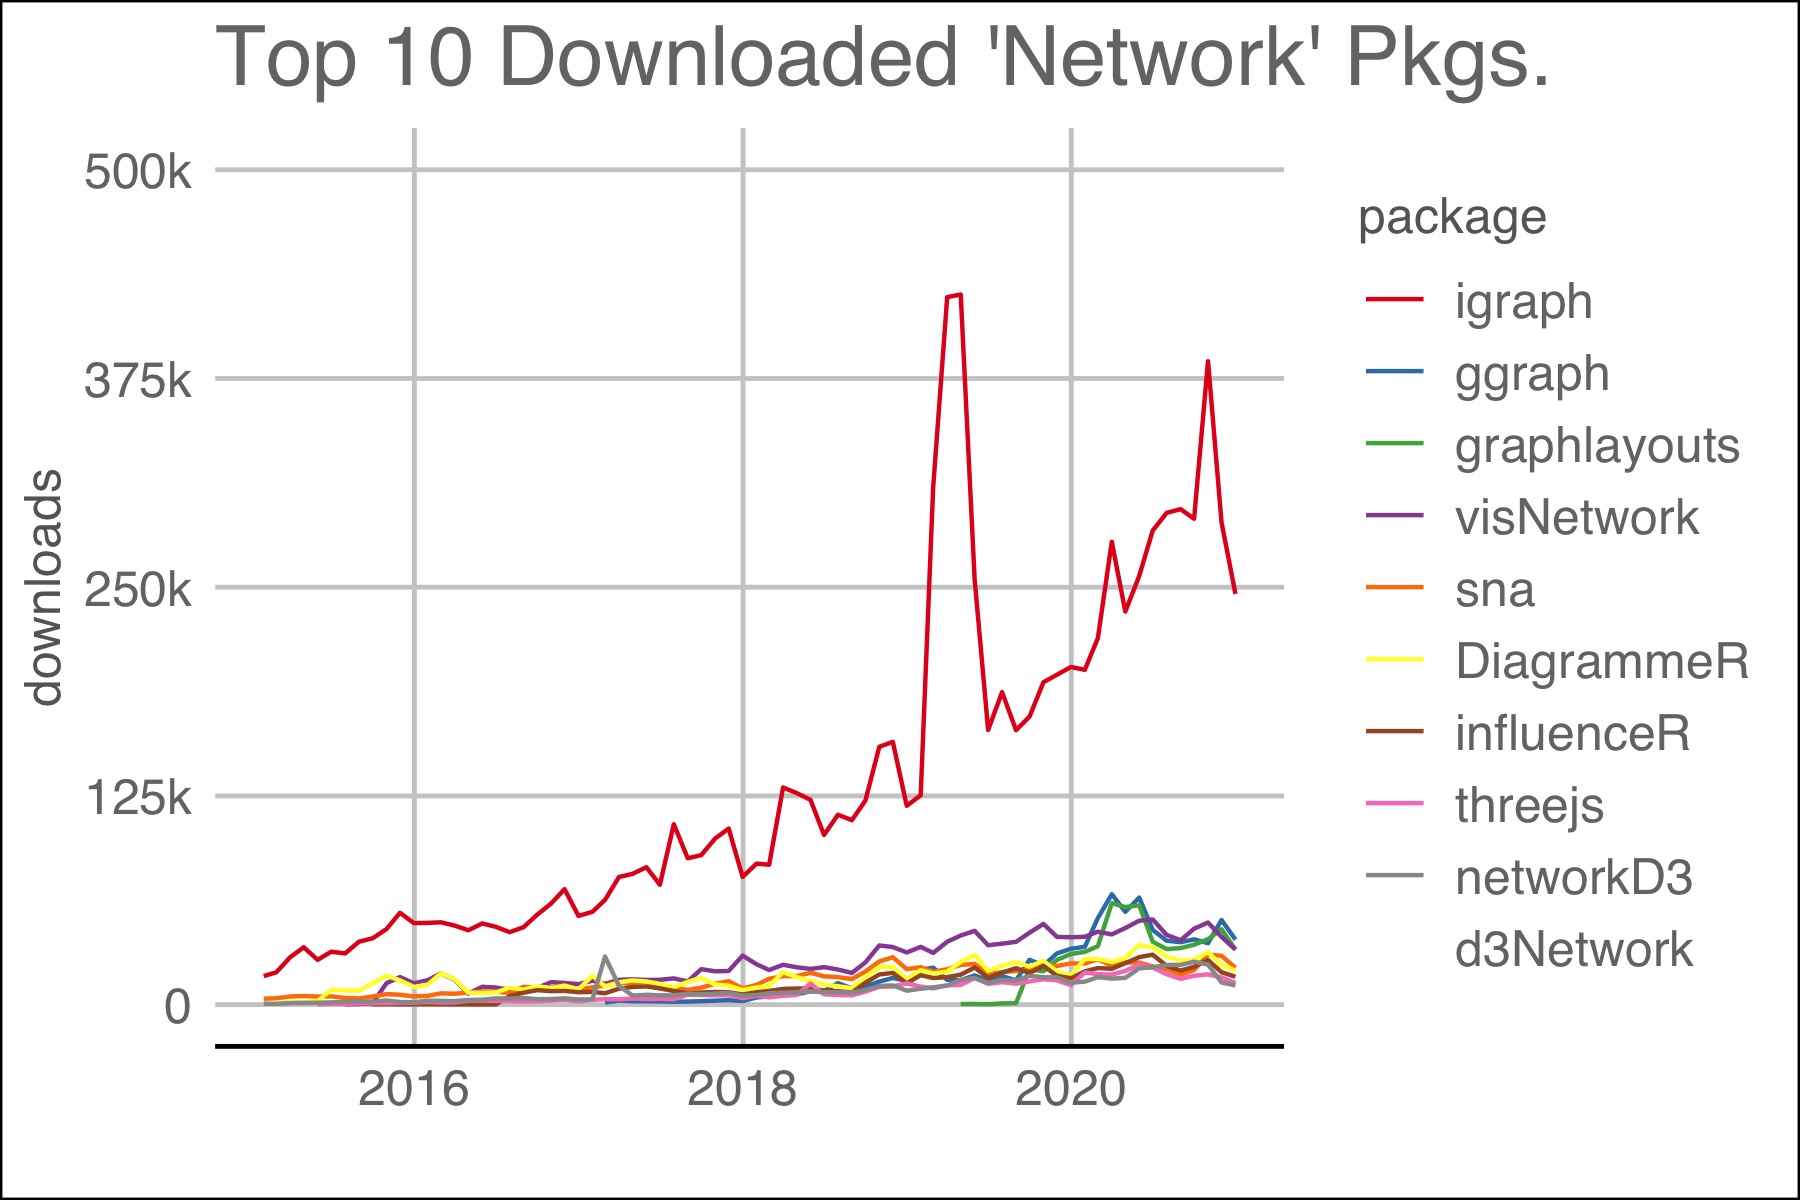 Top 10 packages with 'network' in their title.  Packages dealing with computer networks like 'RCurl' were omitted.